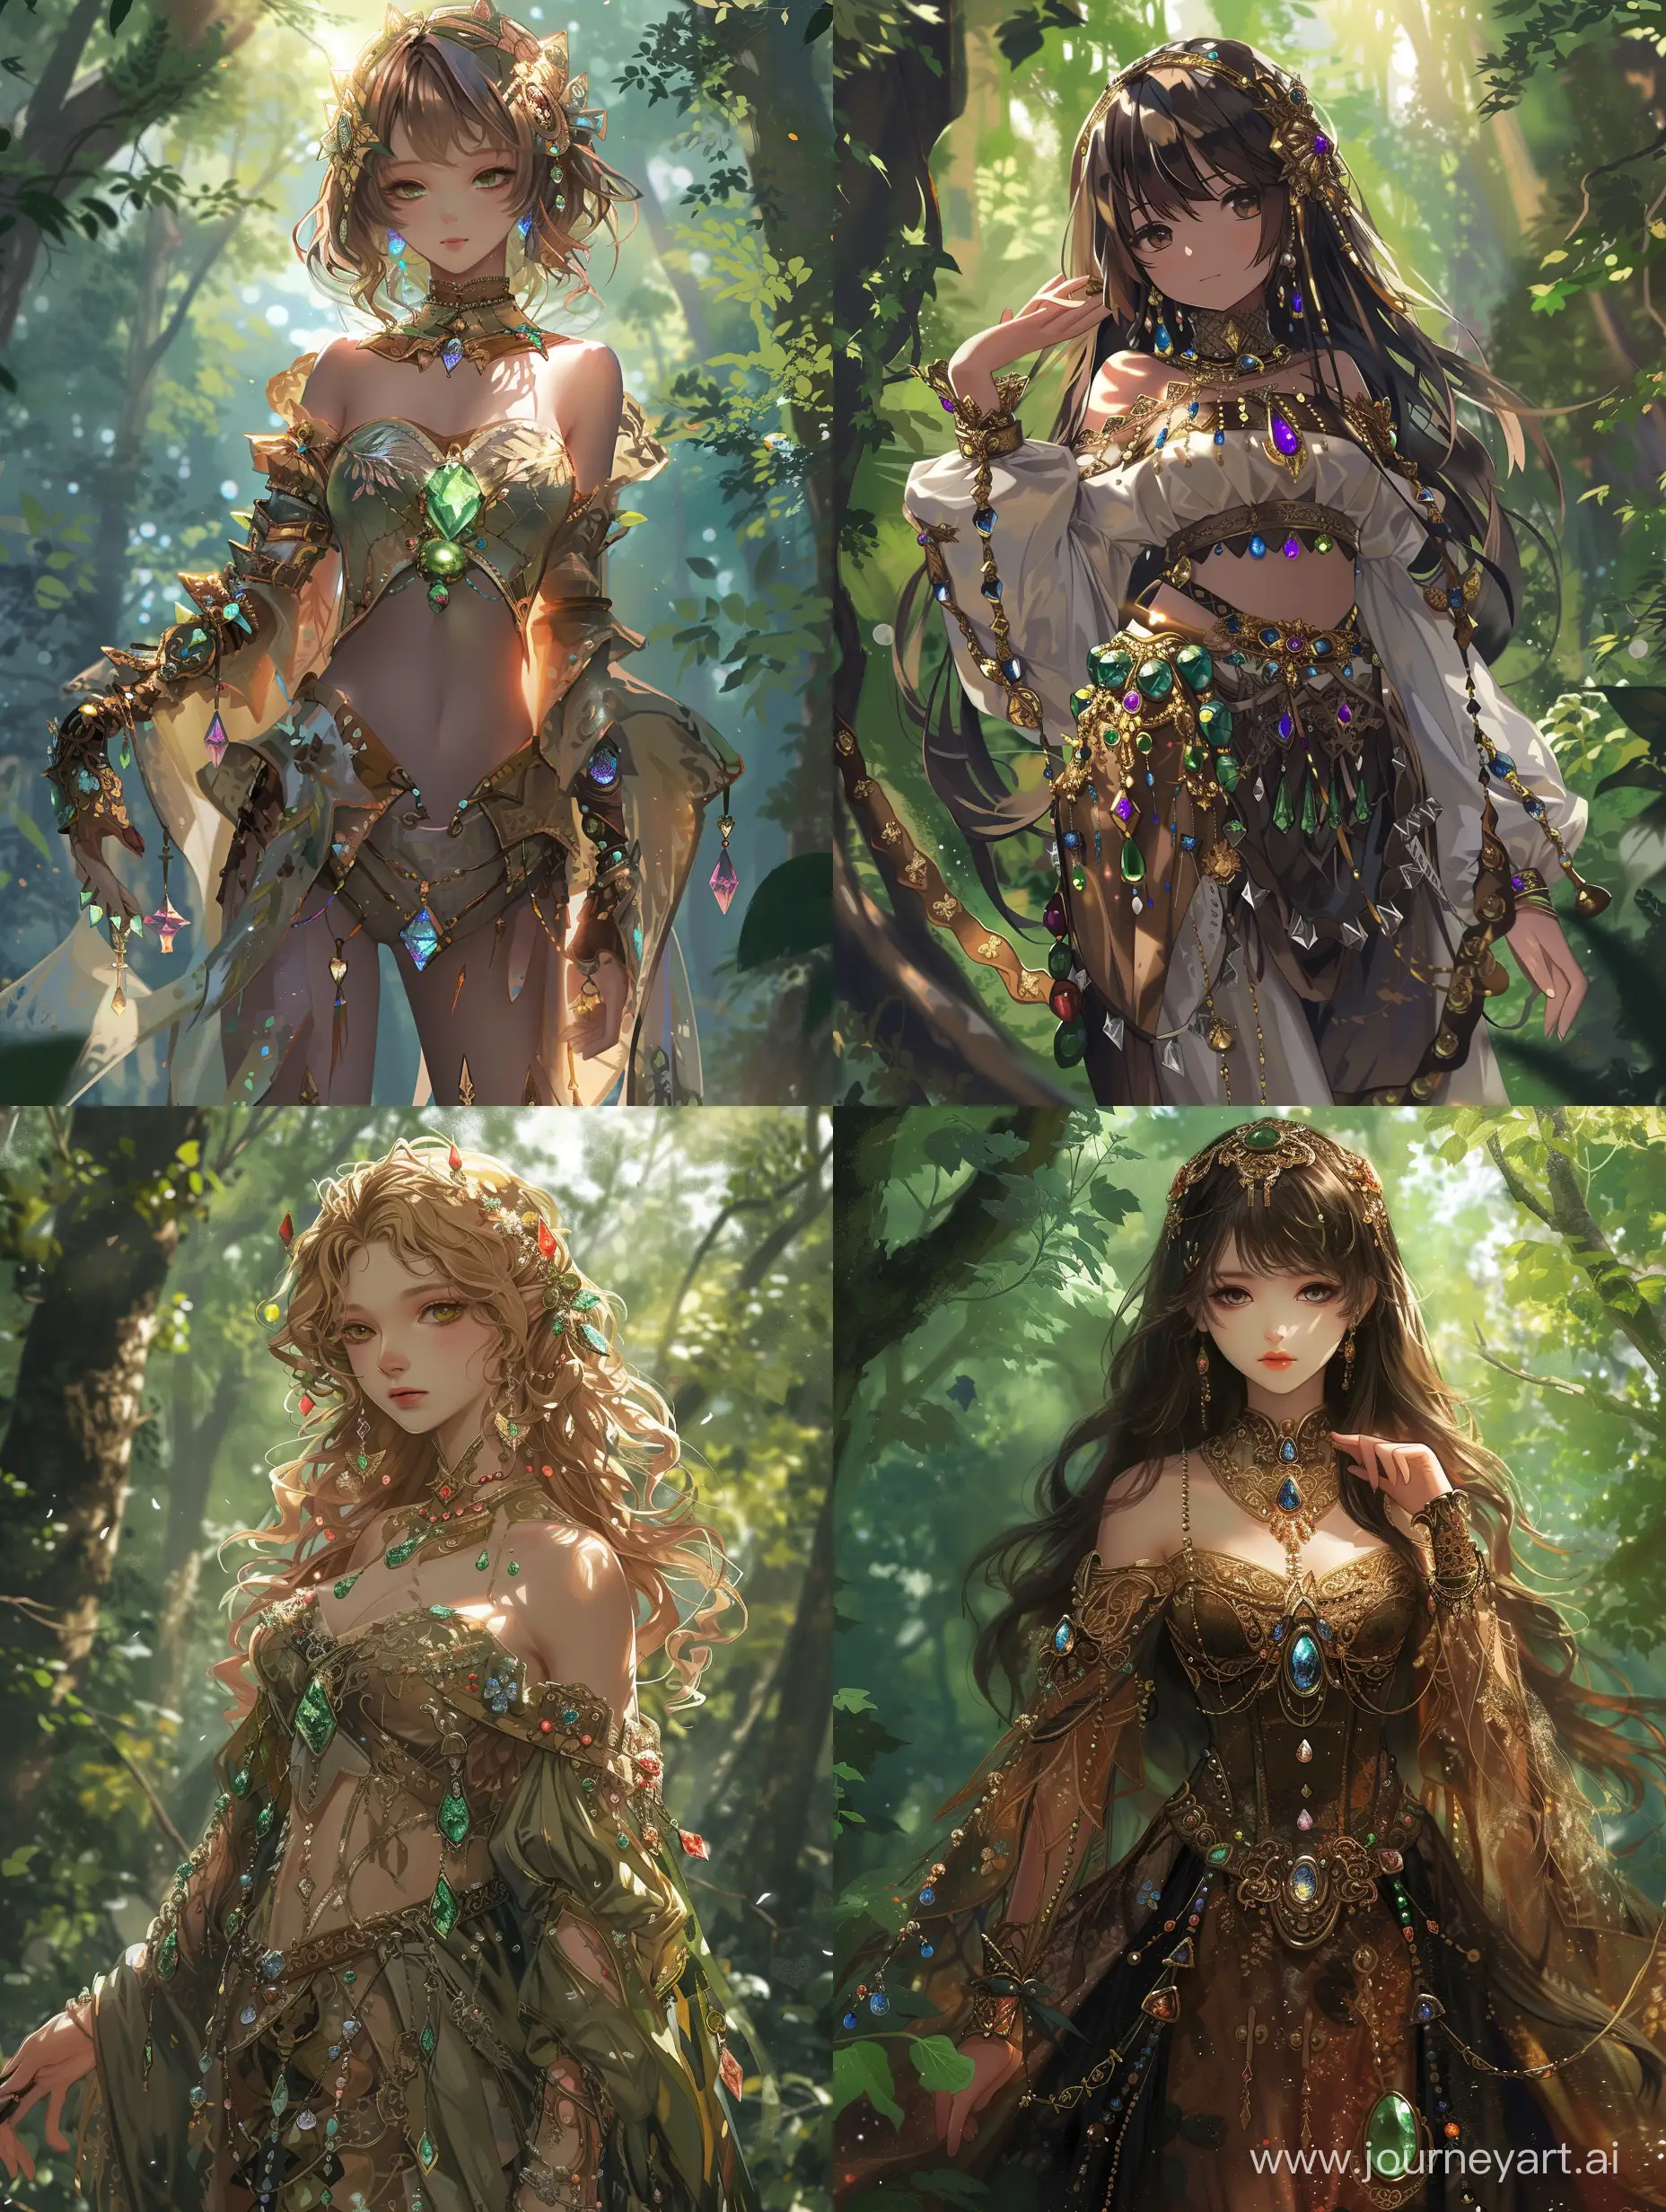 Enchanting-Anime-Traveler-adorned-with-Precious-Stones-in-a-Magical-Forest